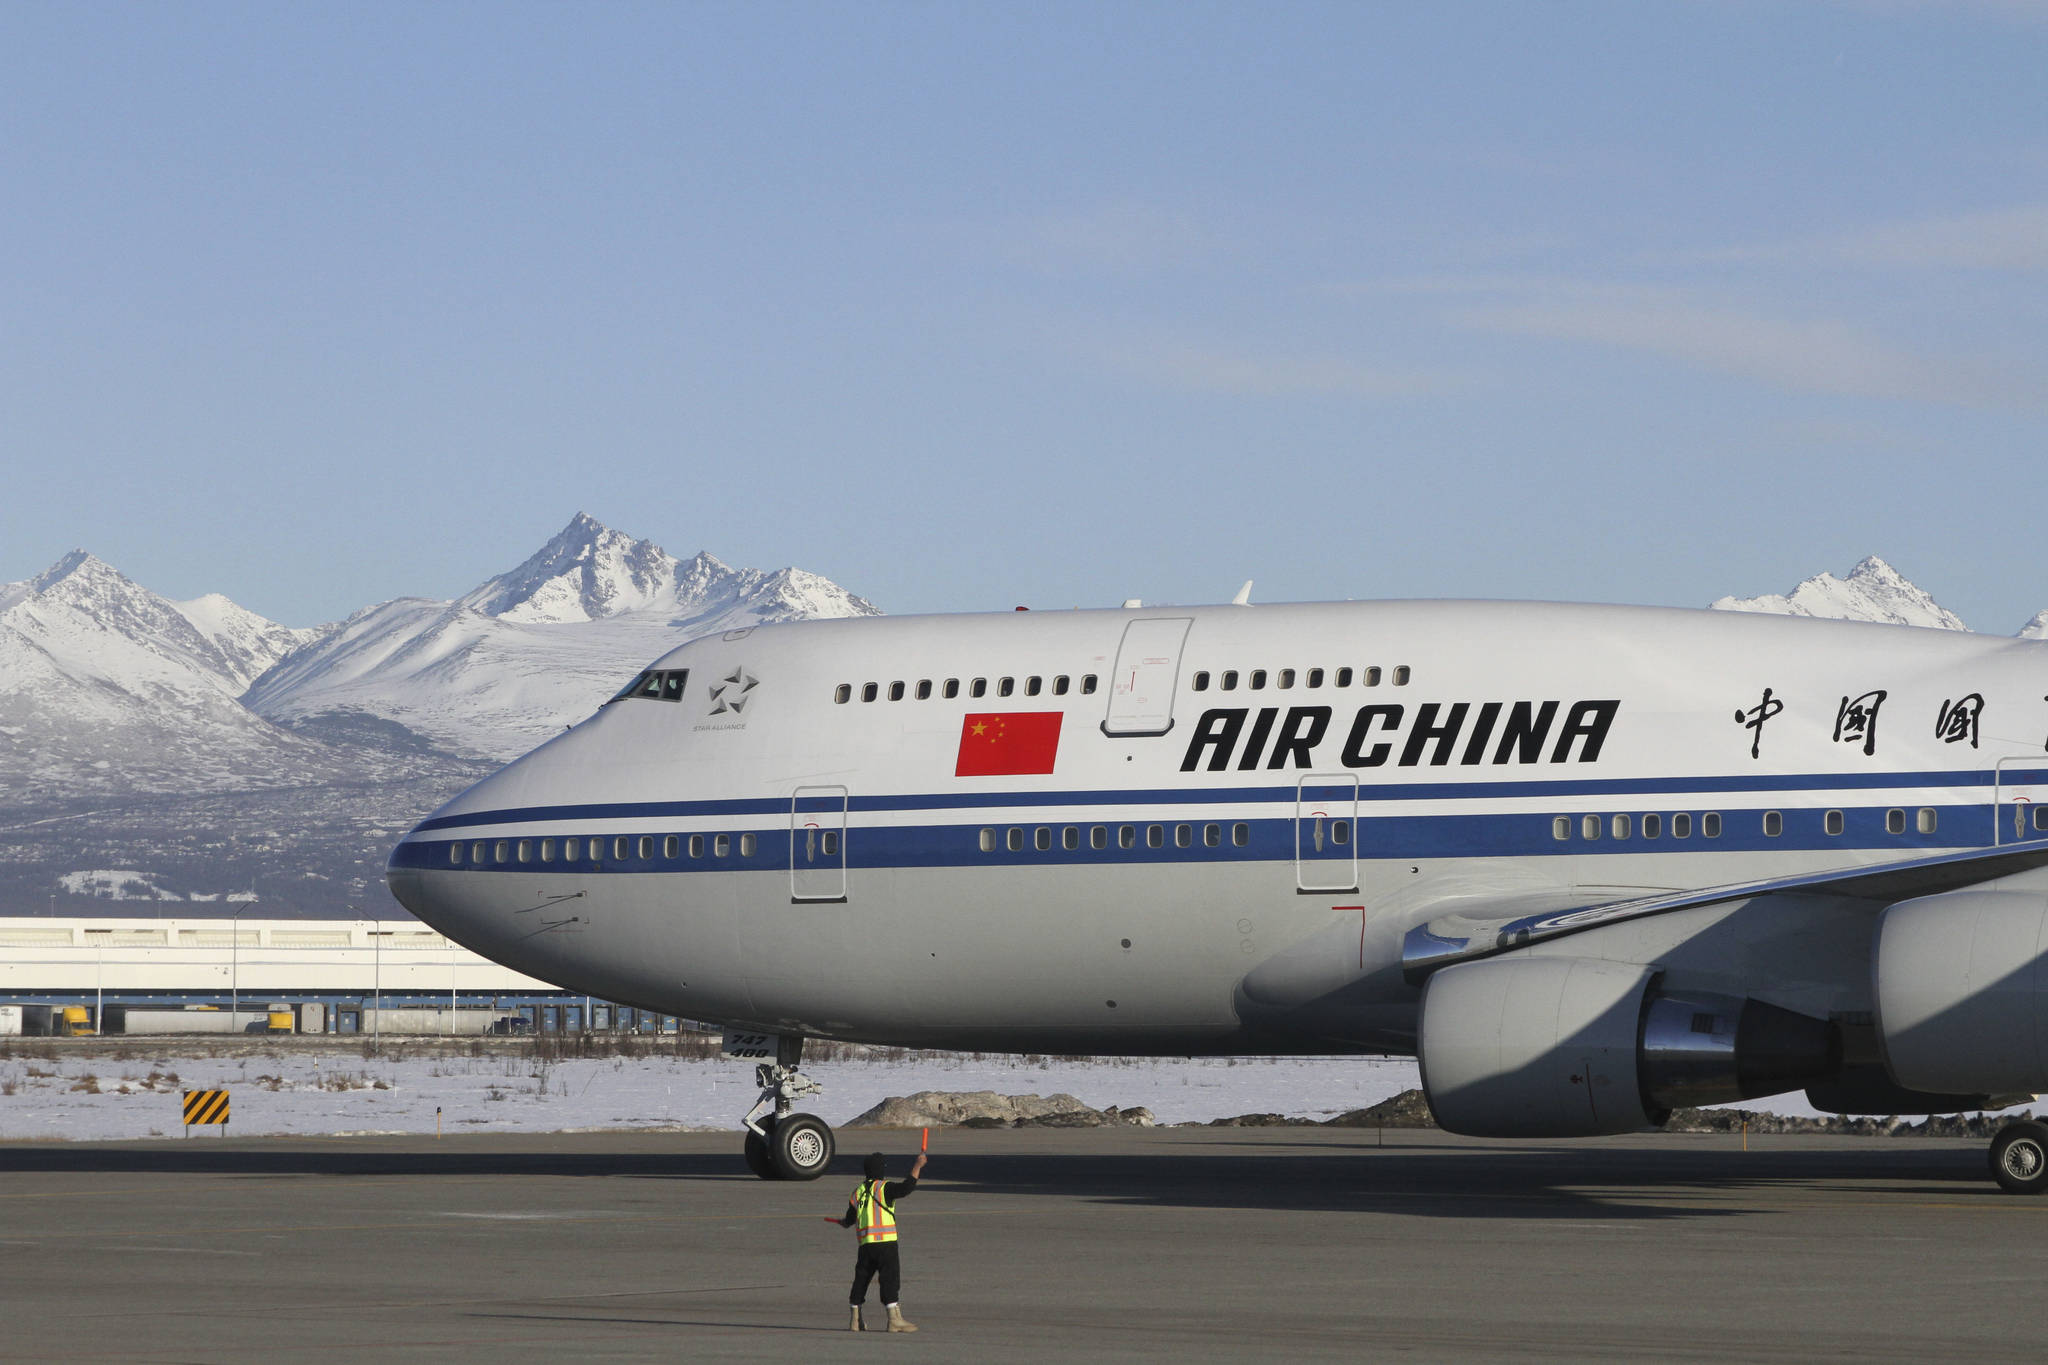 The plane carrying Chinese President Xi Jinping taxies to a stop with the snow-capped Chugach Mountains providing a backdrop Friday, April 7, 2017, in Anchorage, Alaska. During the refueling stop, Xi planned a little sightseeing and a meeting and dinner with Alaska Gov. Bill Walker after spending time earlier in the day with President Donald Trump in Florida. (AP Photo/Mark Thiessen)